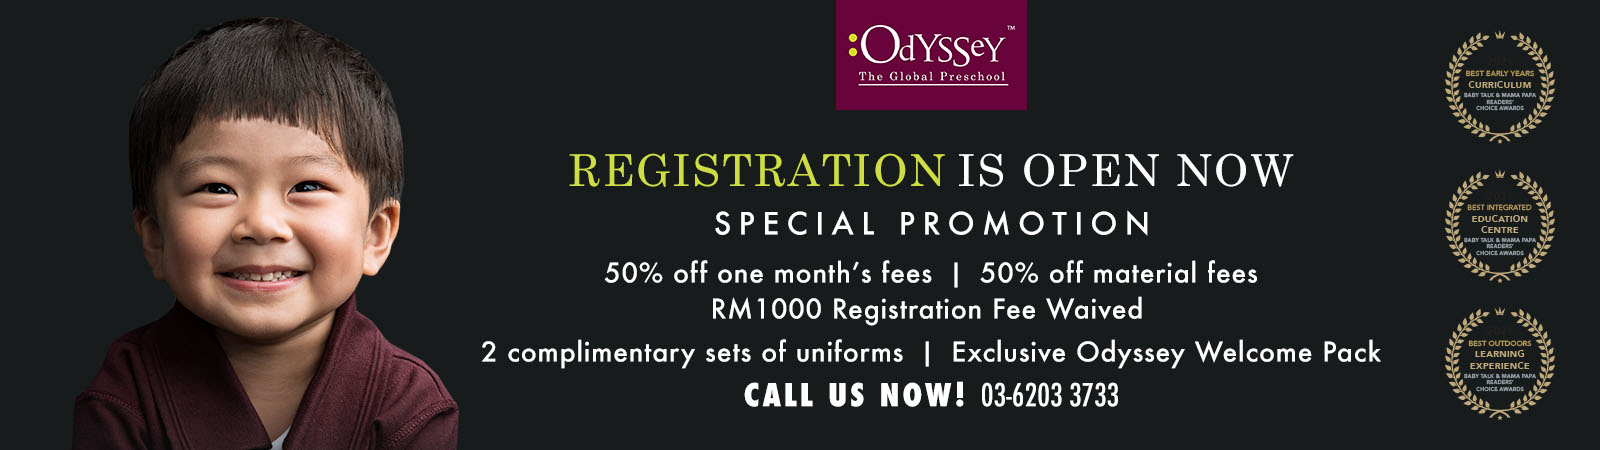 Odyssey The Global Preschool Early Years Curriculum: Tailored to your child’s specific requirements